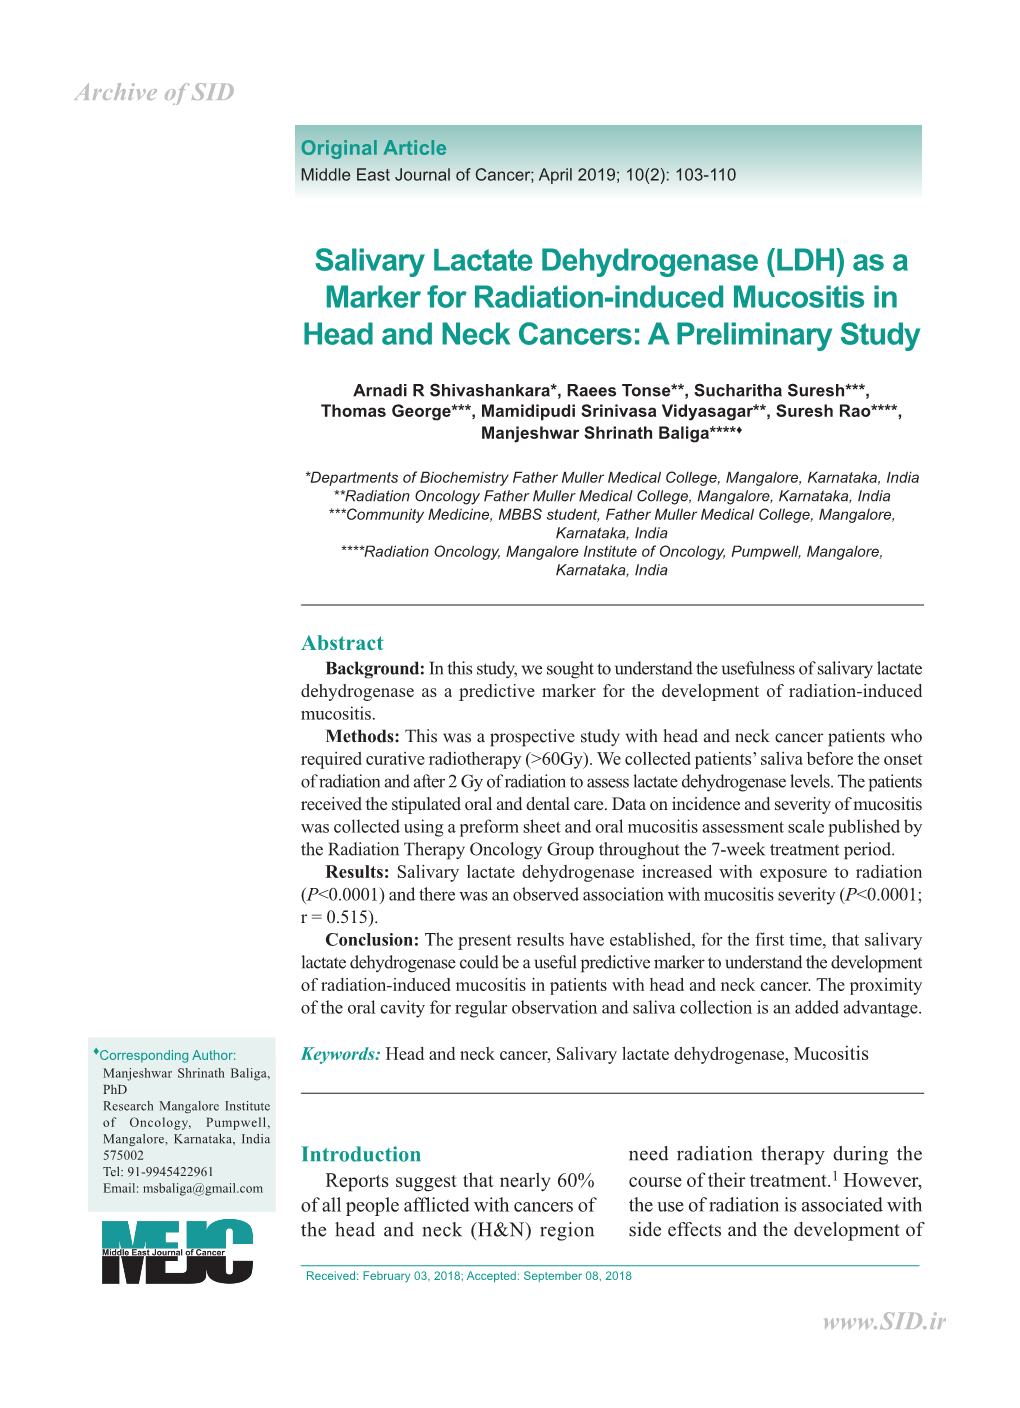 Salivary Lactate Dehydrogenase (LDH) As a Marker for Radiation-Induced Mucositis in Head and Neck Cancers: a Preliminary Study